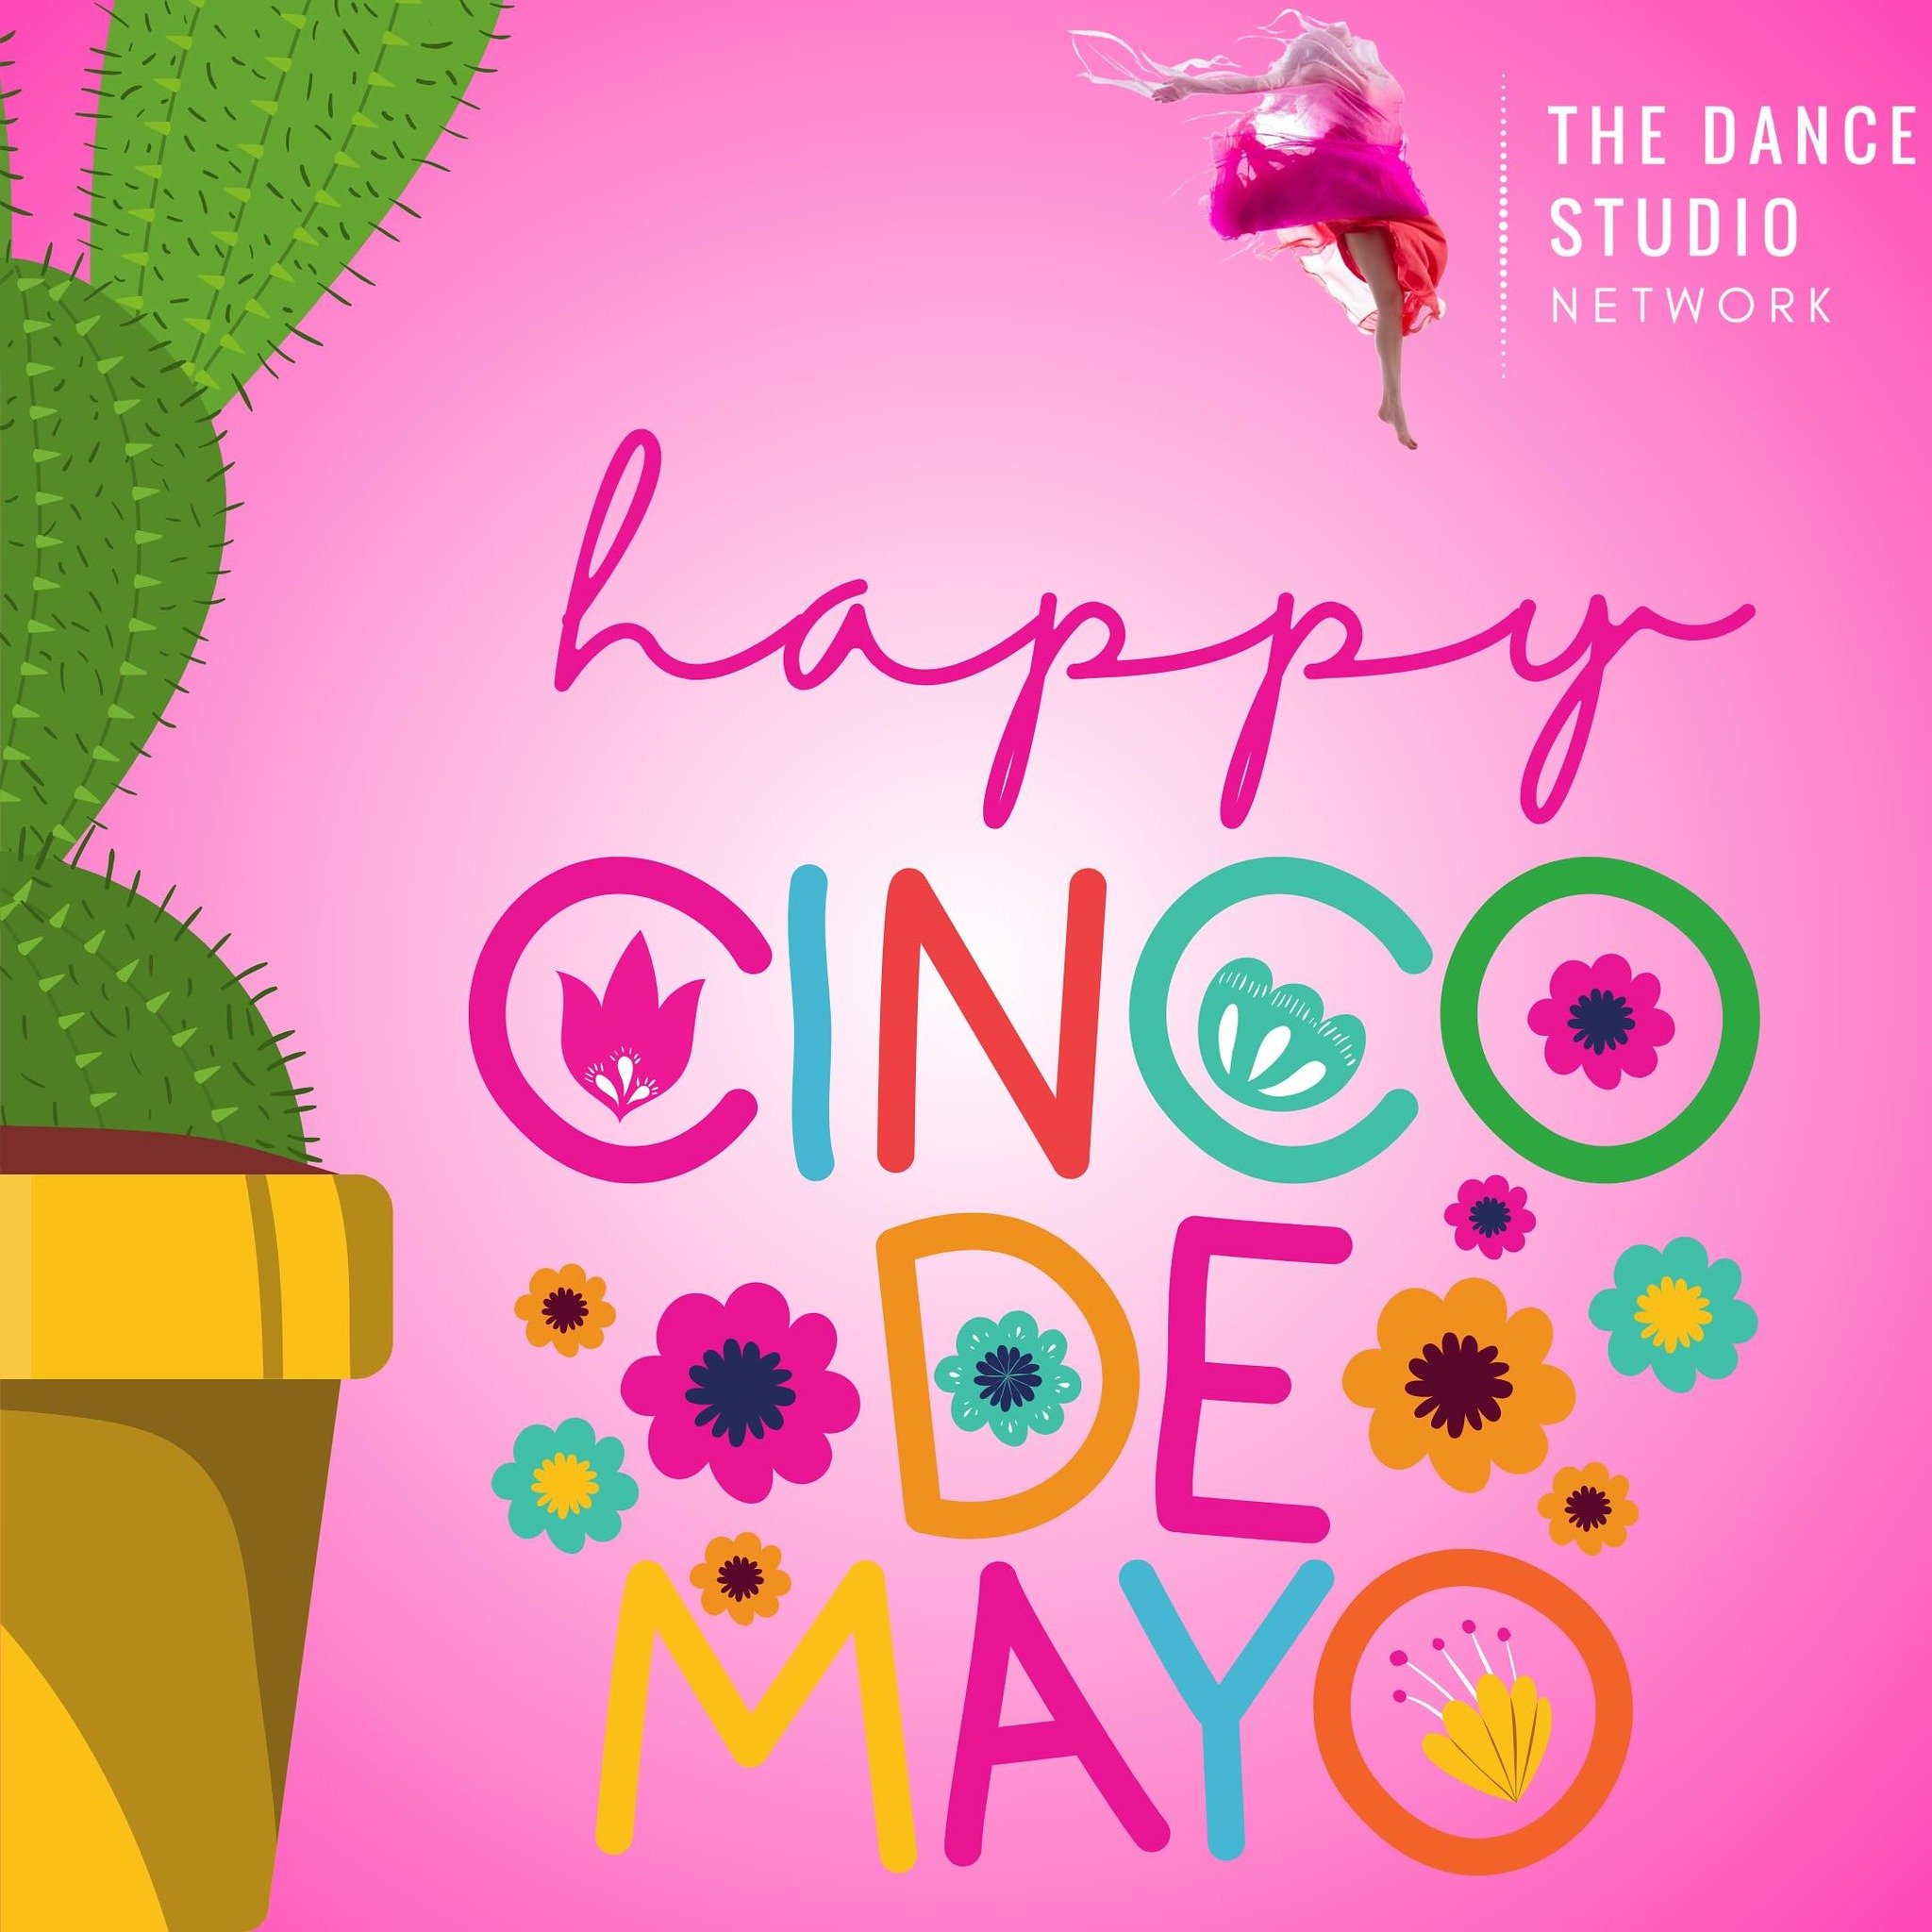 Happy Cinco de Mayo dance families! 🪇 🌵 🌮 

#passionartistrydance #discovertheartistwithin #allendancestudio #mckinneydancestudio #friscodancestudio #thedancestudionetwork